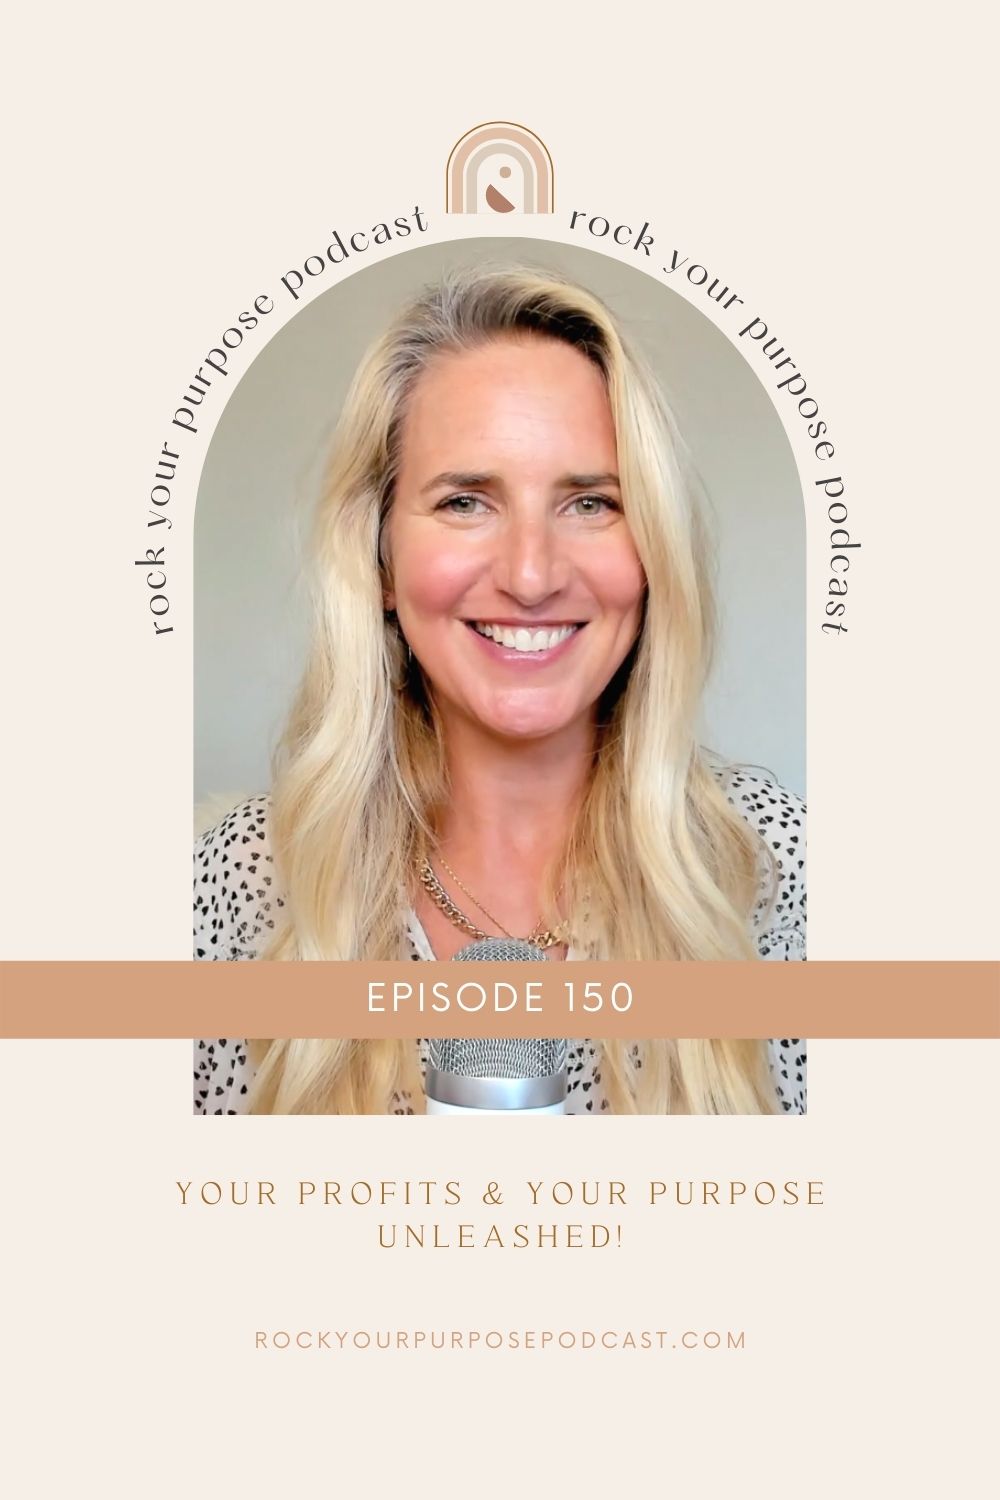 emily perry episode 150 rock your purpose podcast your profits purpose unleashed